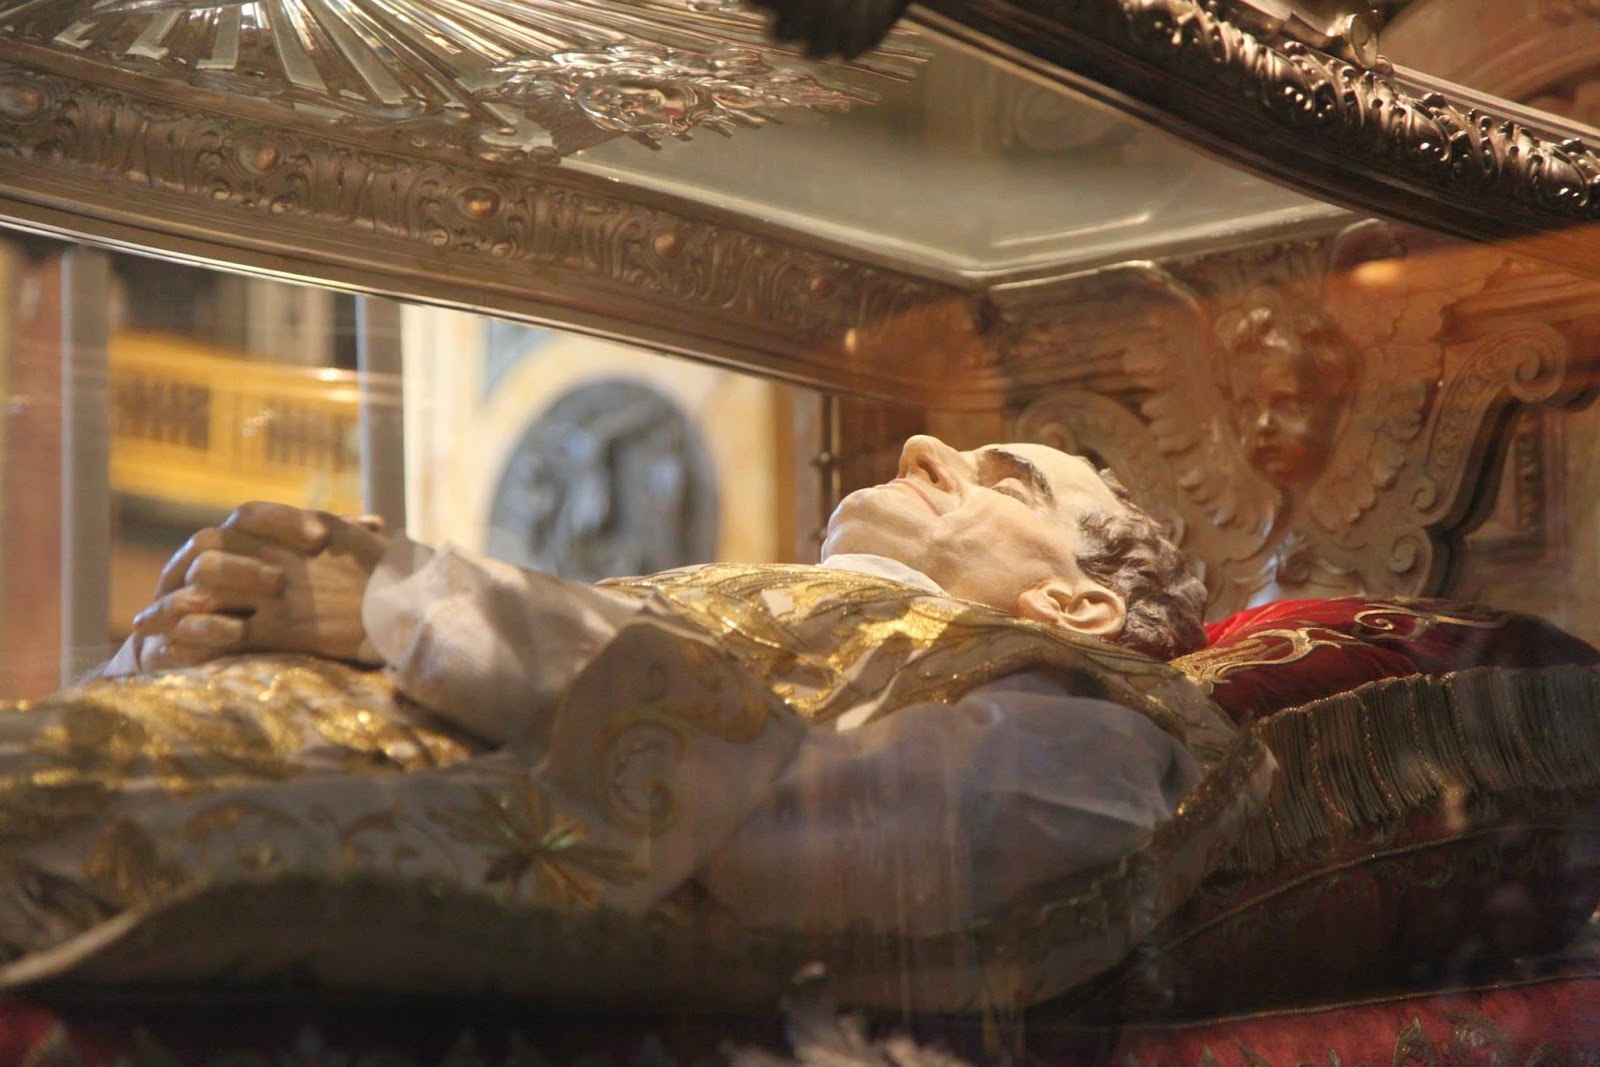 The relics of Don Bosco